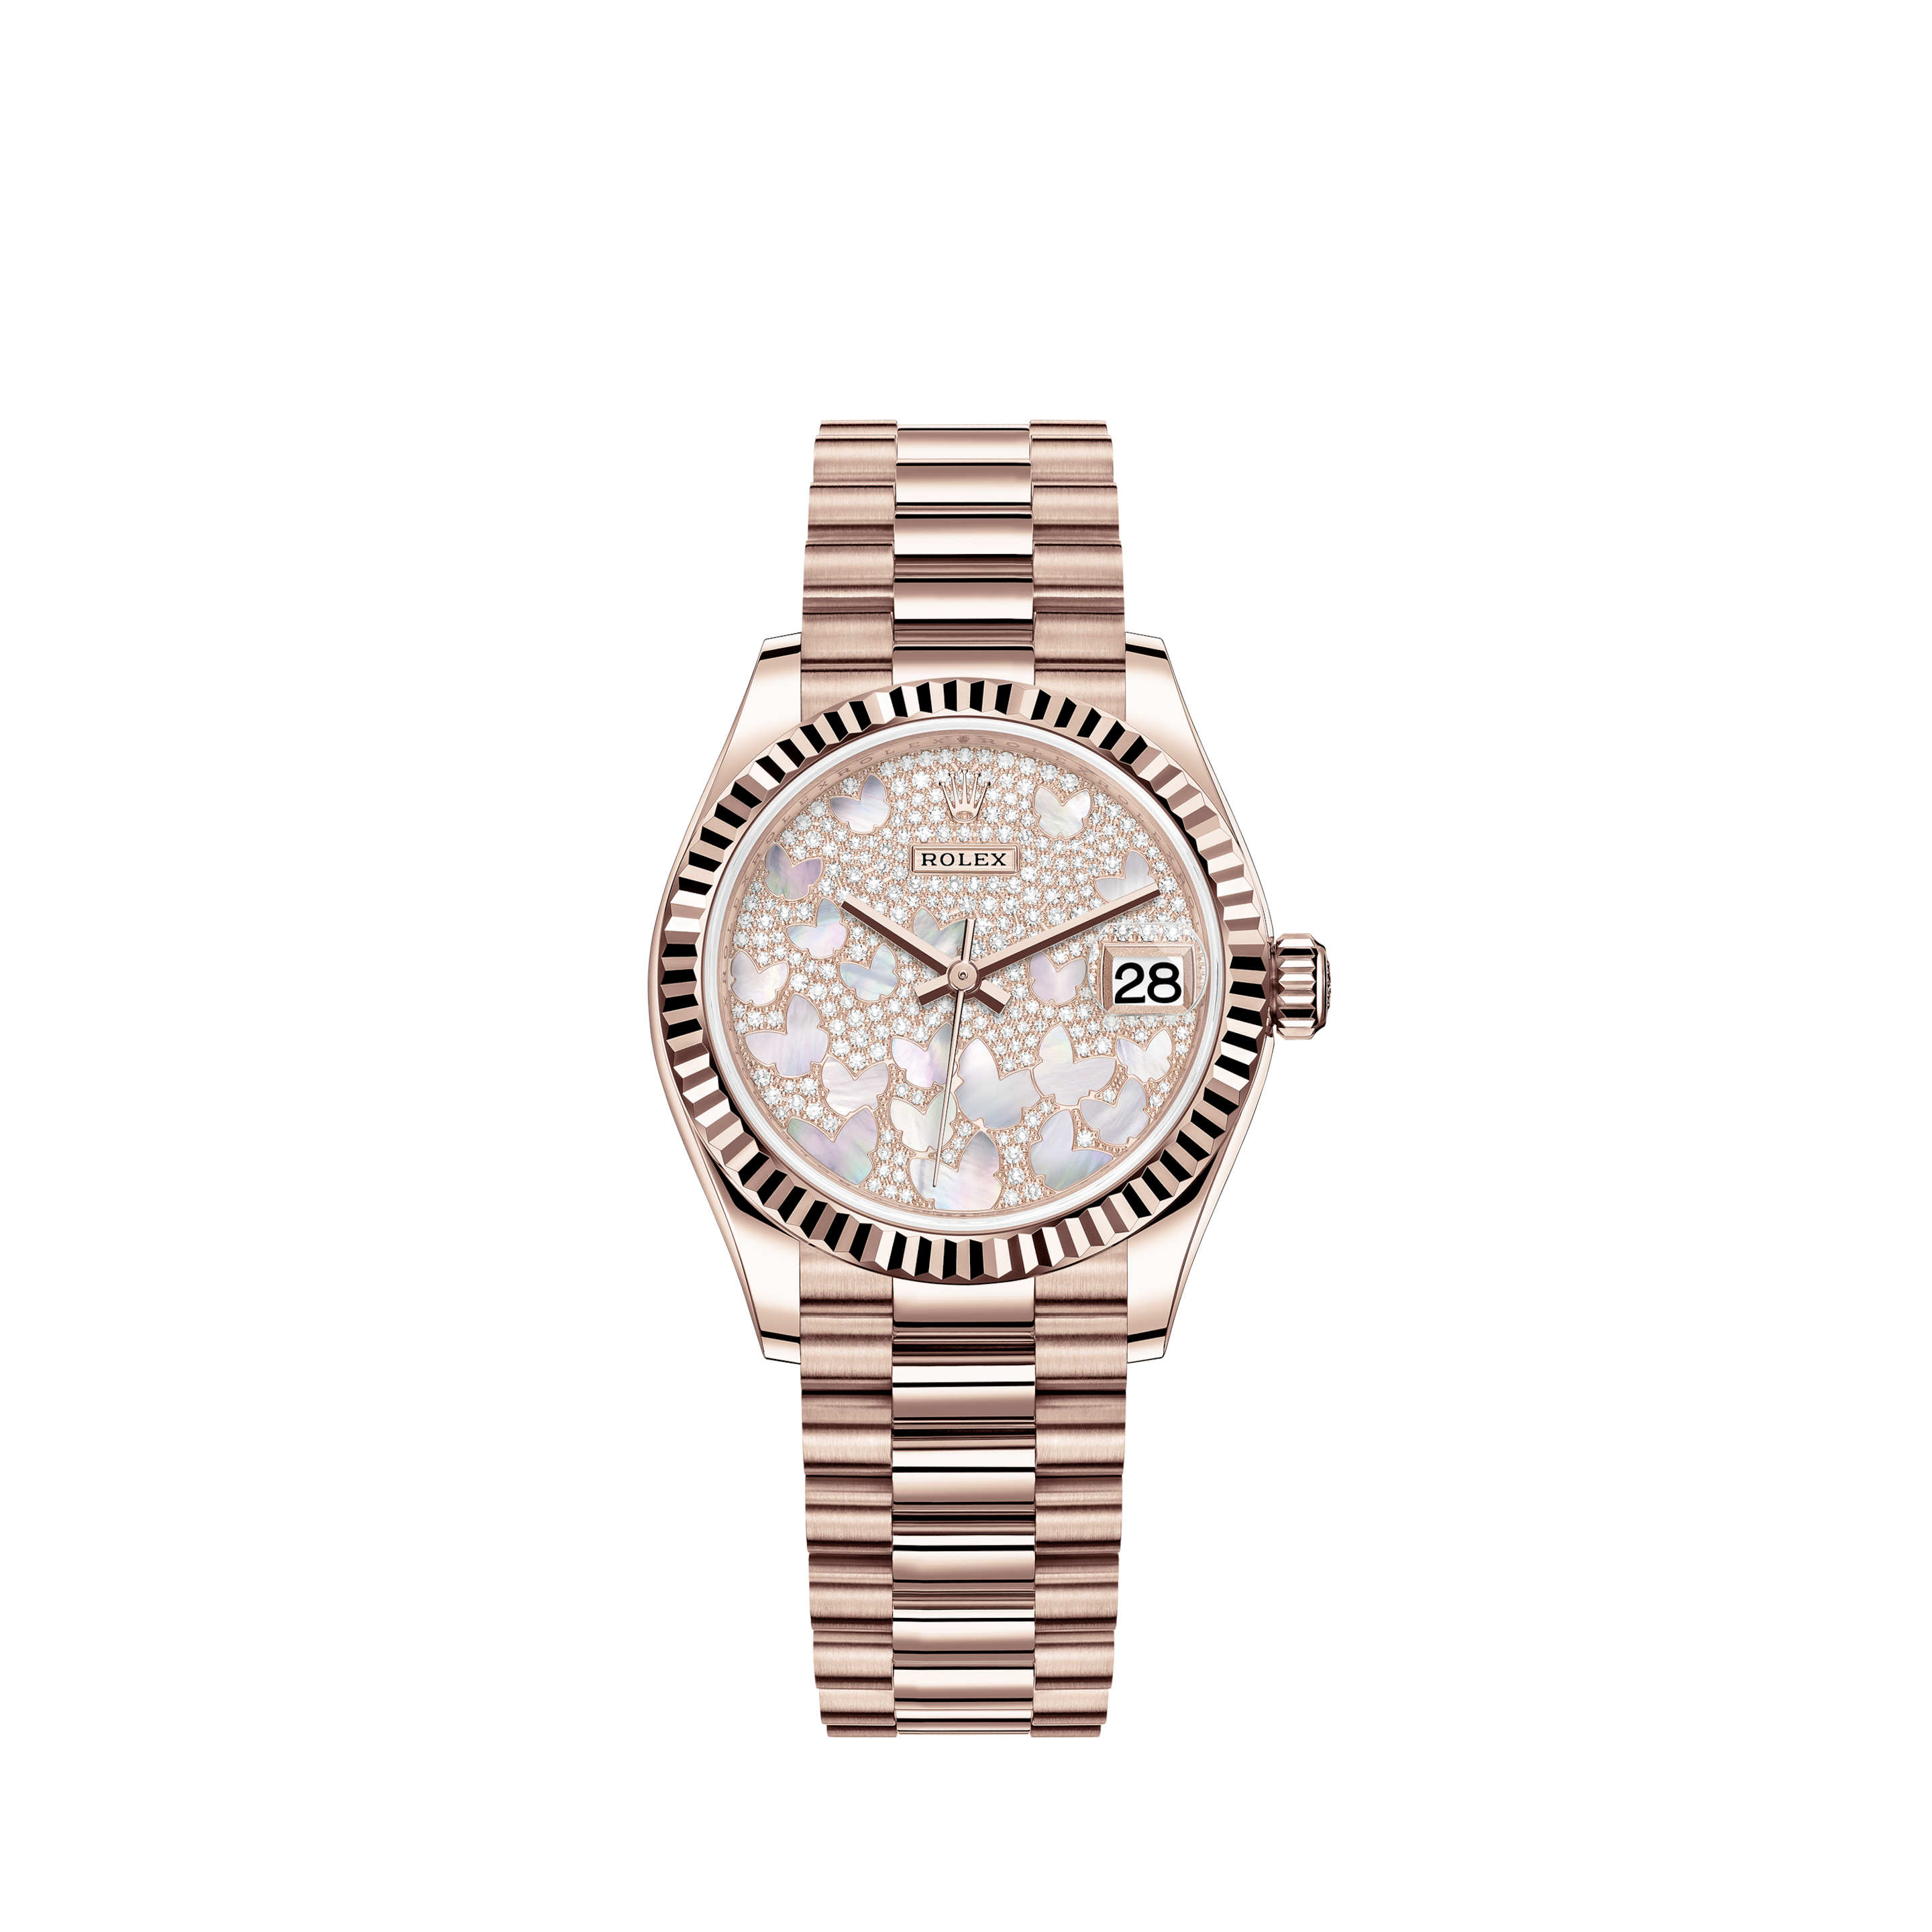 Rolex Datejust 36MM 18K White Gold Factory Diamonds Pink Dial Like New Box&Papers